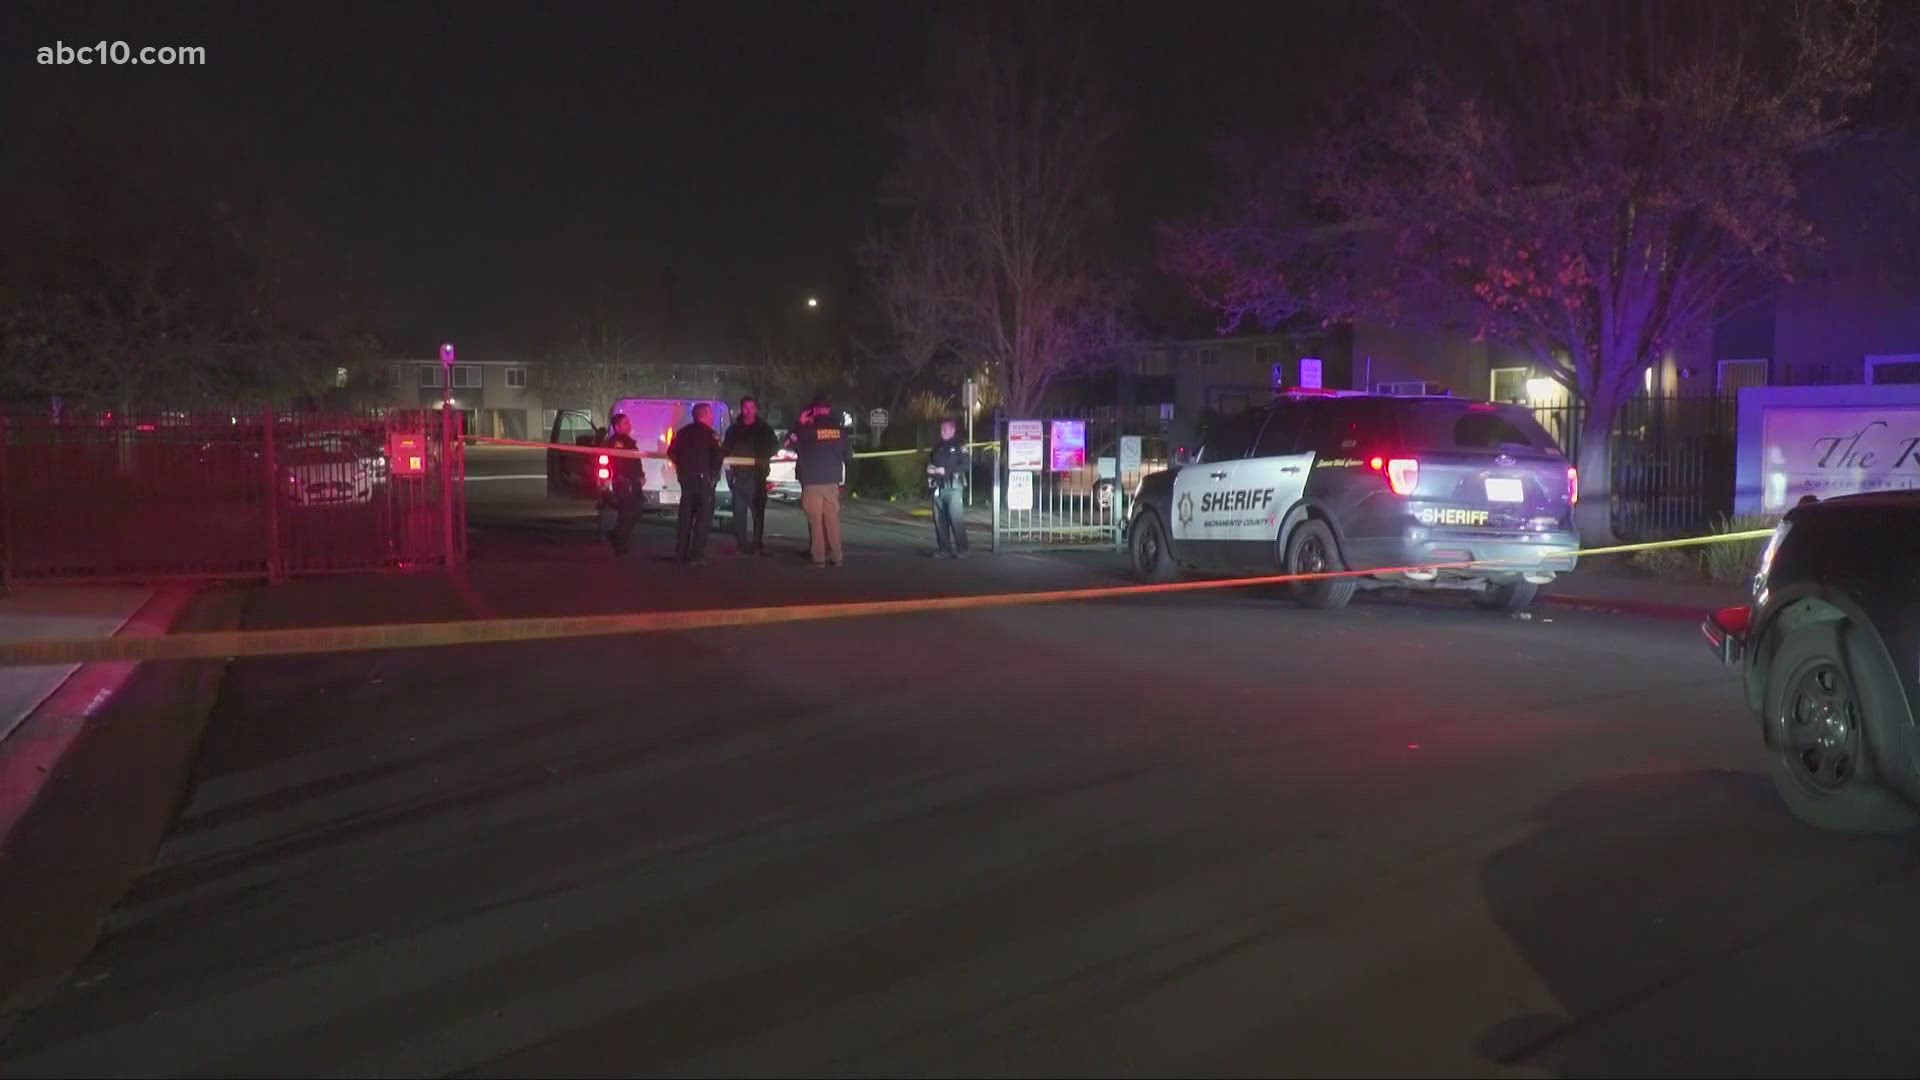 The Sacramento Sheriff’s Office is investigating after two people were shot in a neighborhood in North Highlands on Friday.